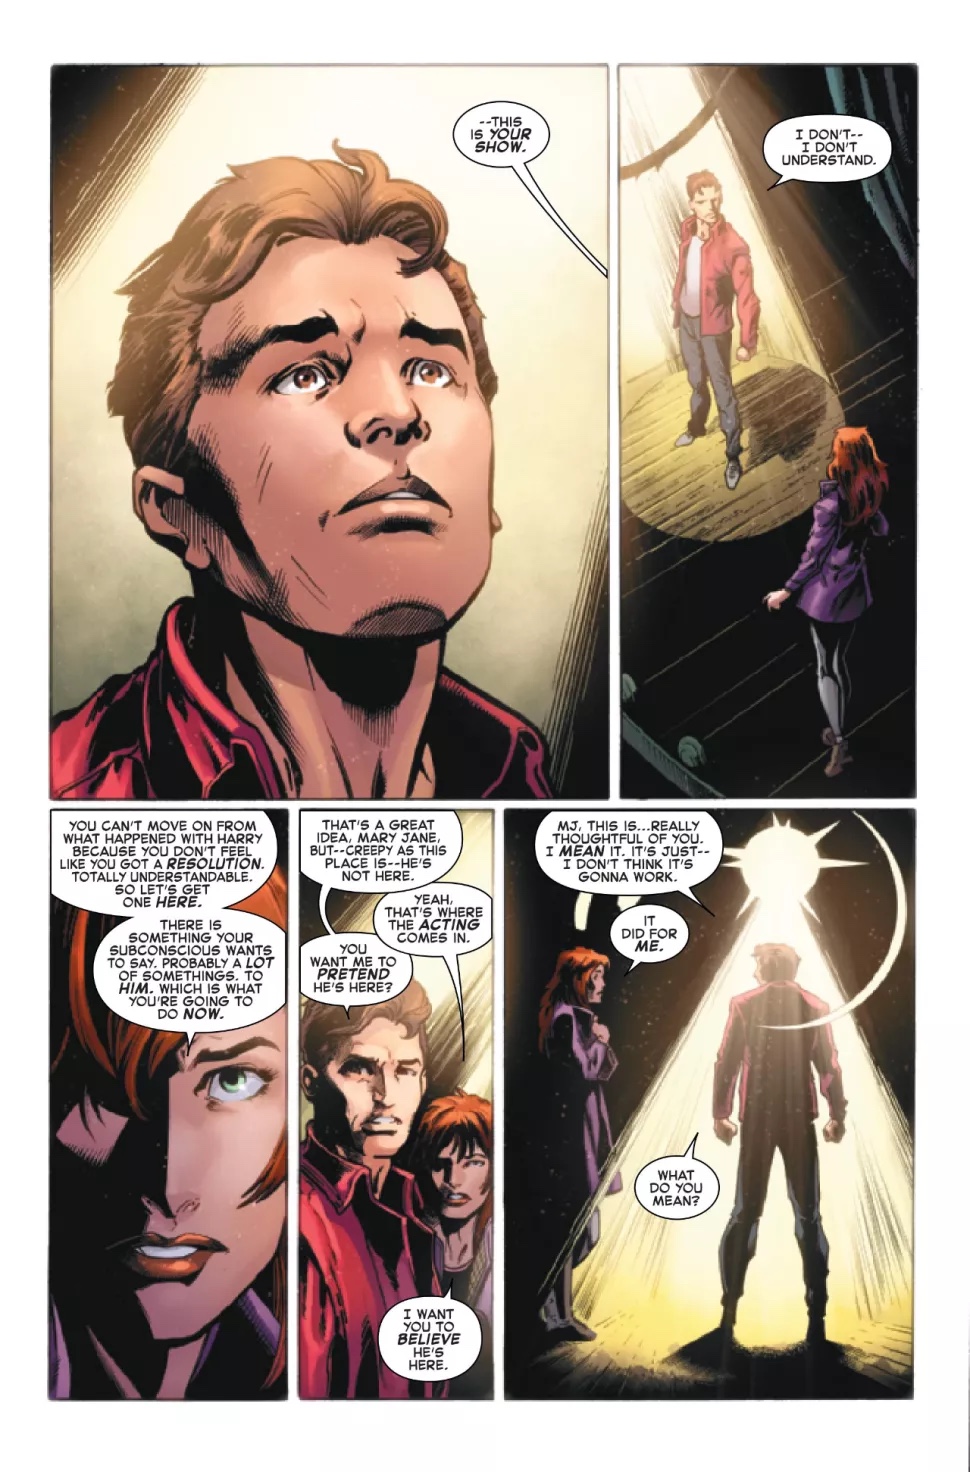 Amazing Spider-Man #60 preview